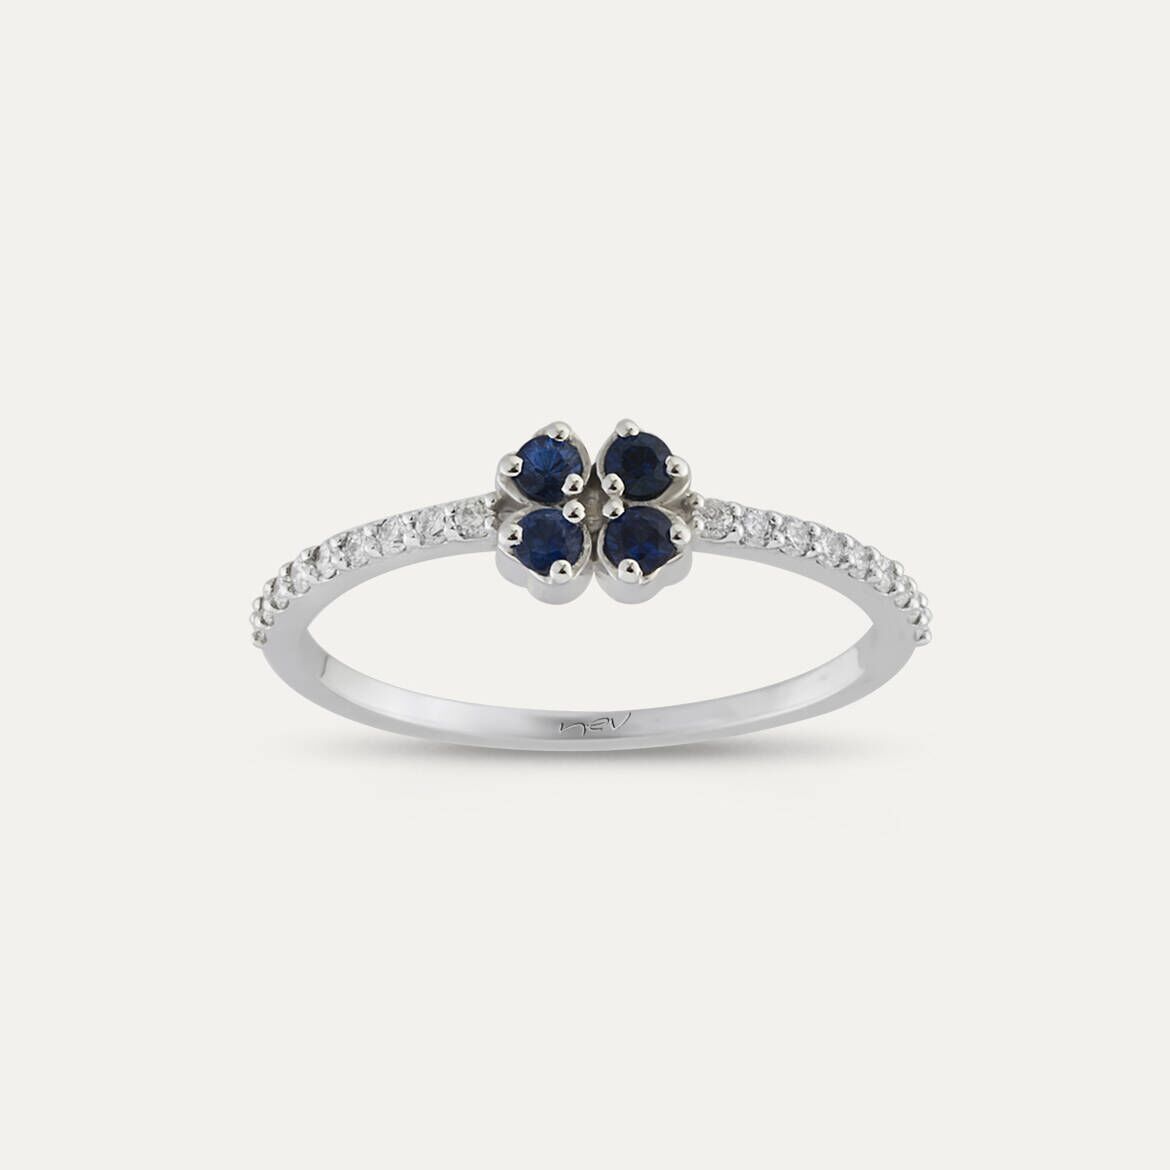 0.32 CT Diamond and Sapphire Four Leaf Clover Ring